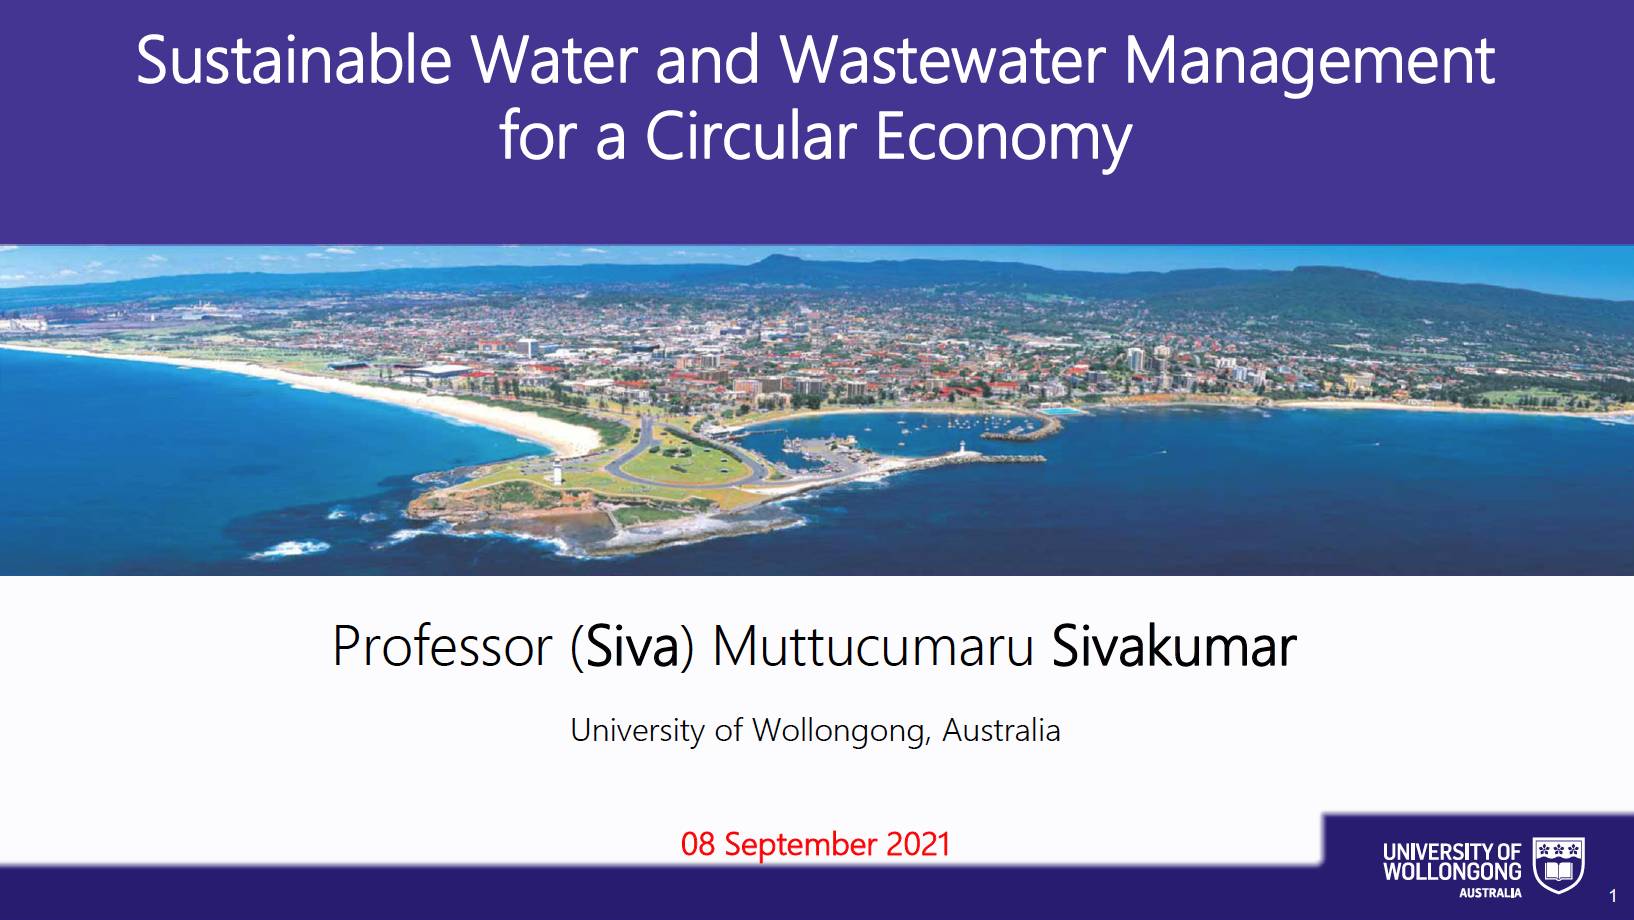 Sustainable Water and Wastewater Management for a Circular Economy